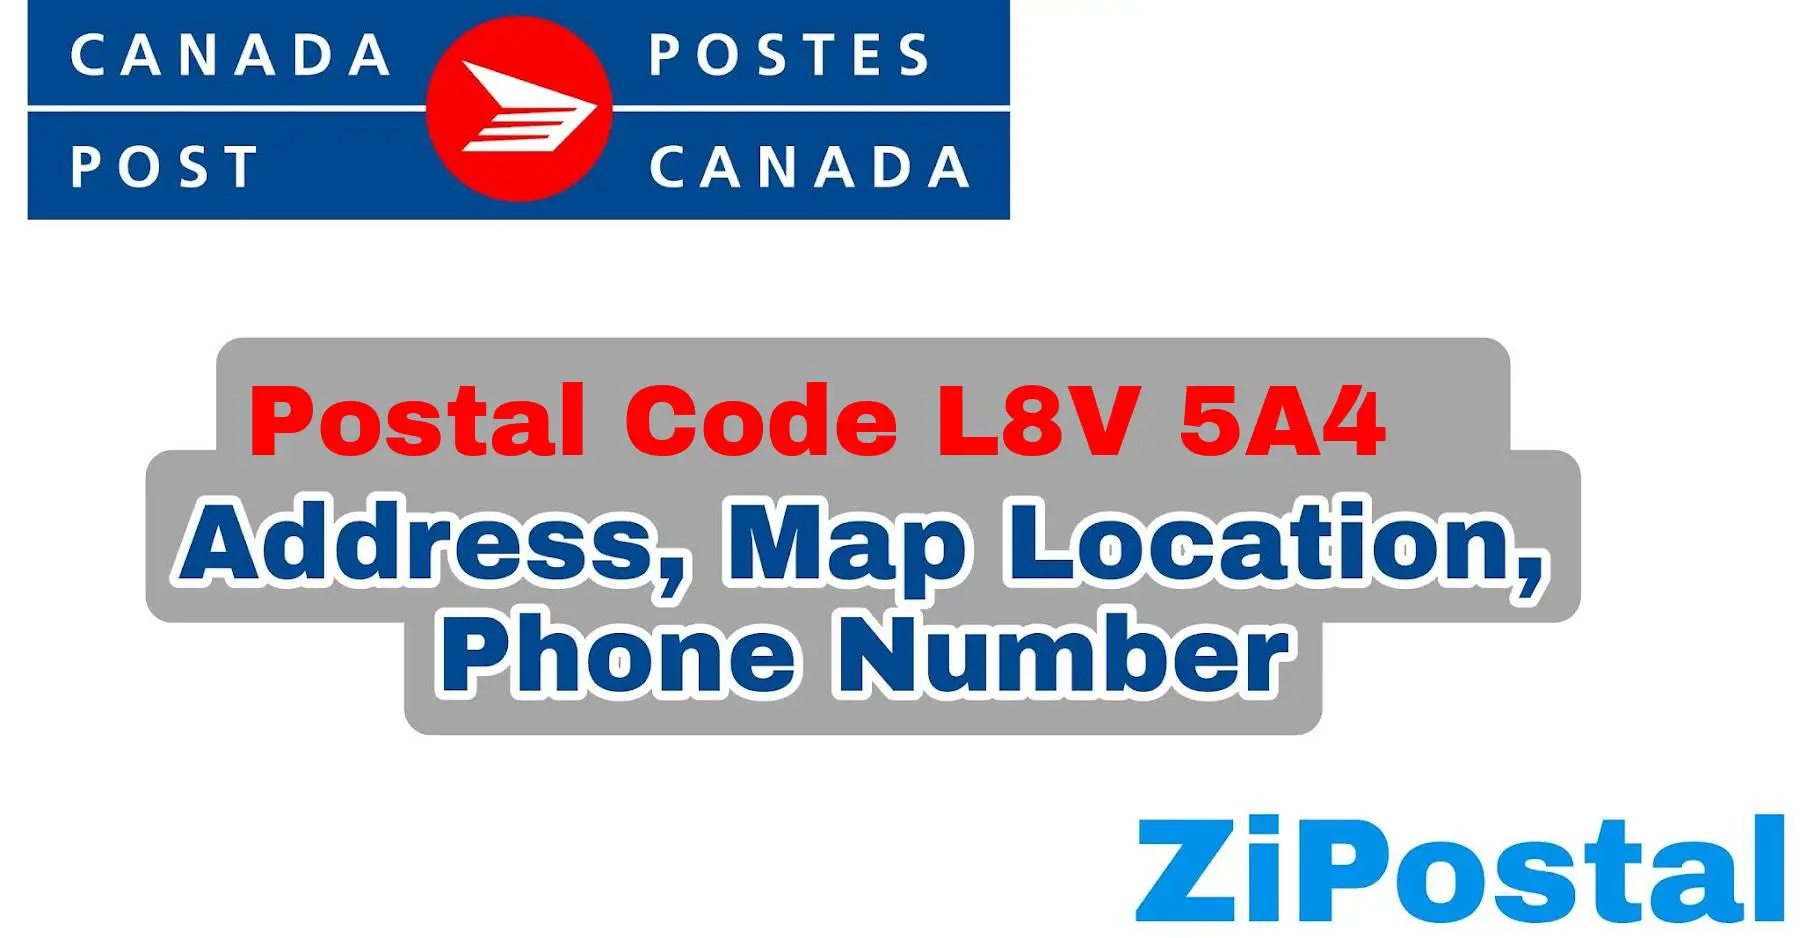 Postal Code L8V 5A4 Address Map Location and Phone Number